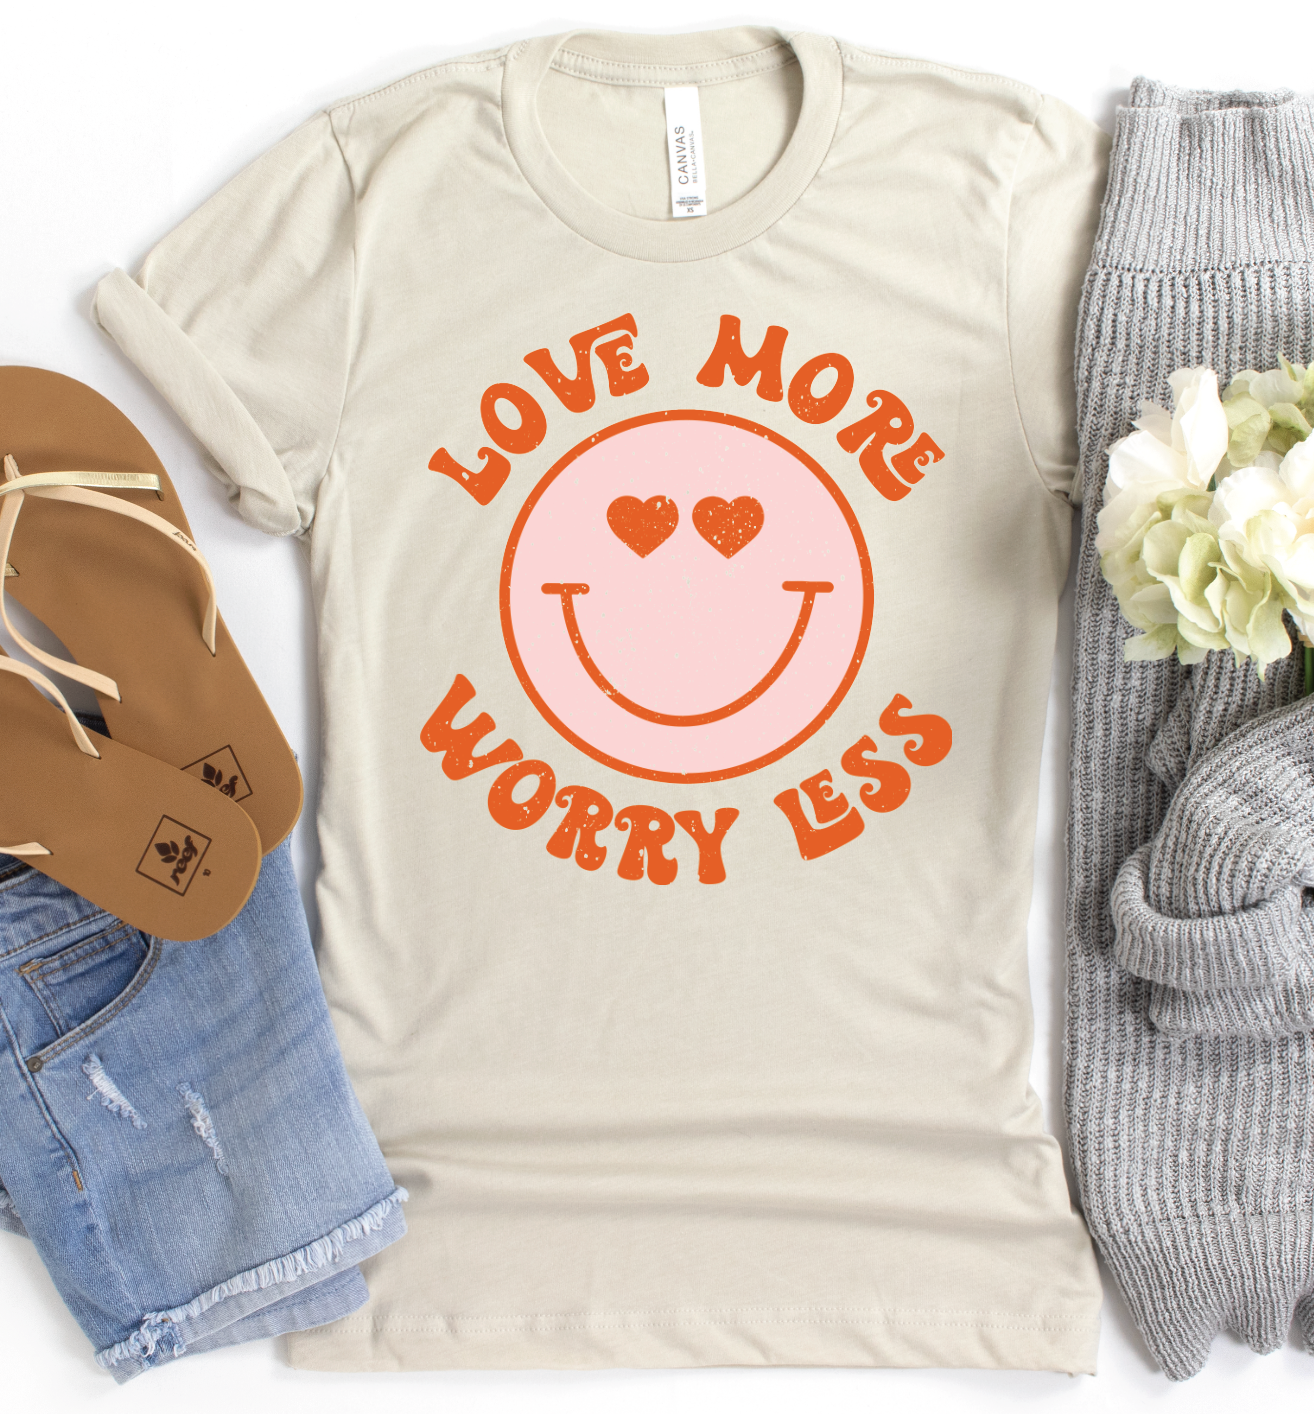 Love More Worry Less ❤️ Graphic T-shirt